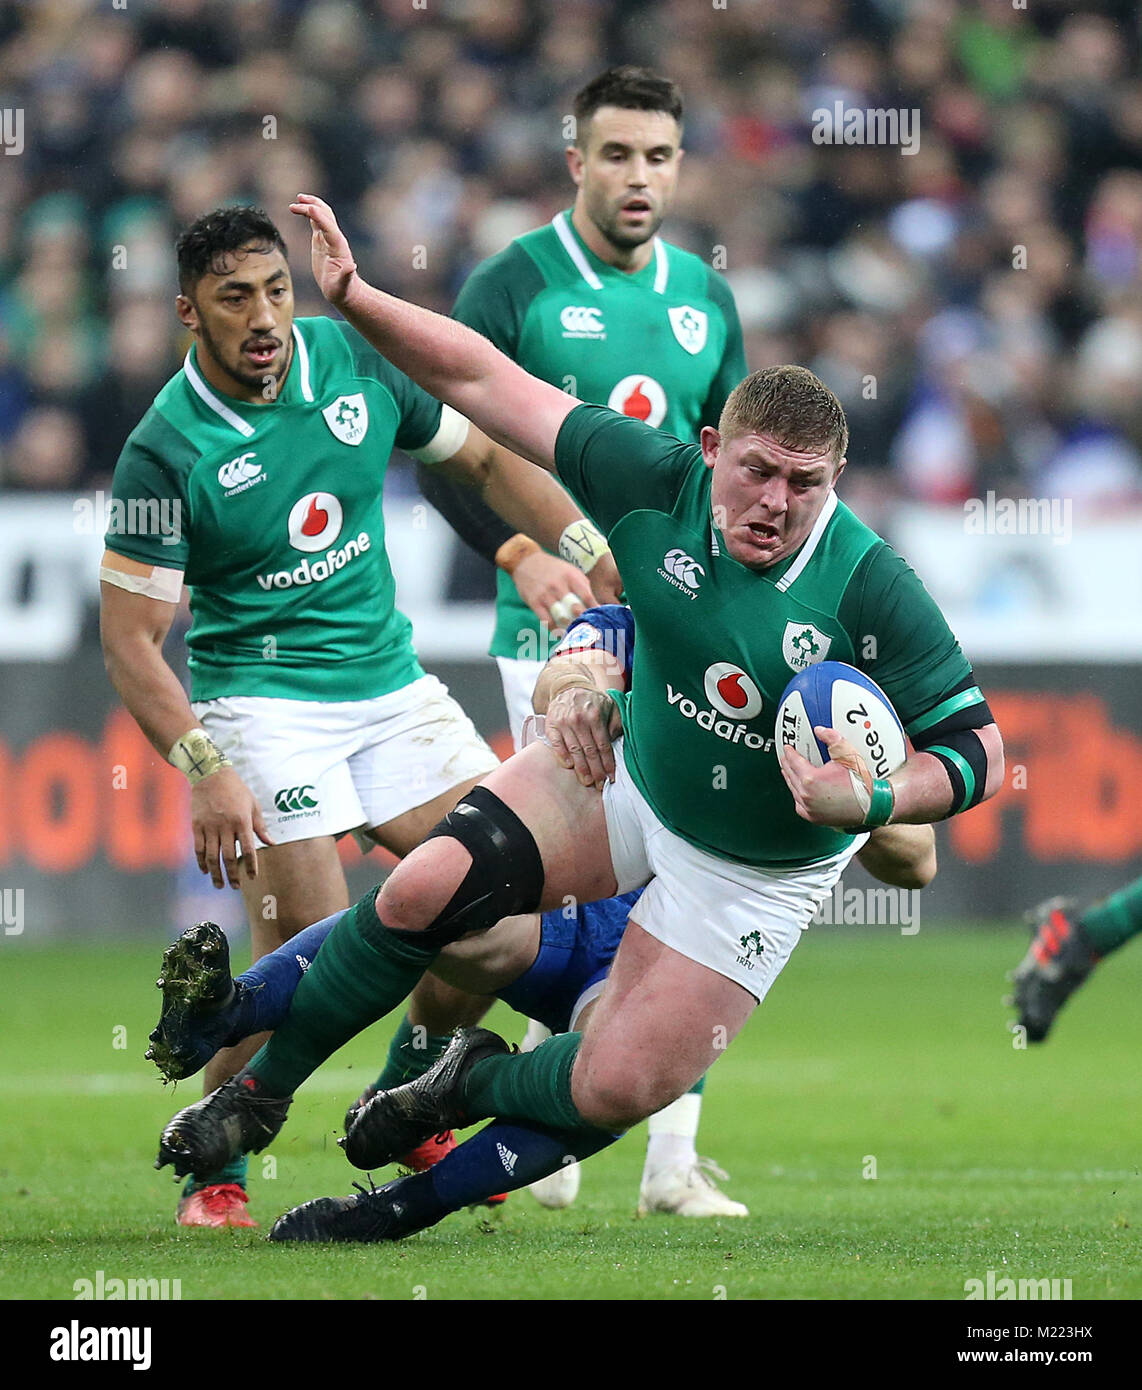 Irelands Tadhg Furlong in action during the NatWest 6 Nations match at the Stade de France, Paris Stock Photo